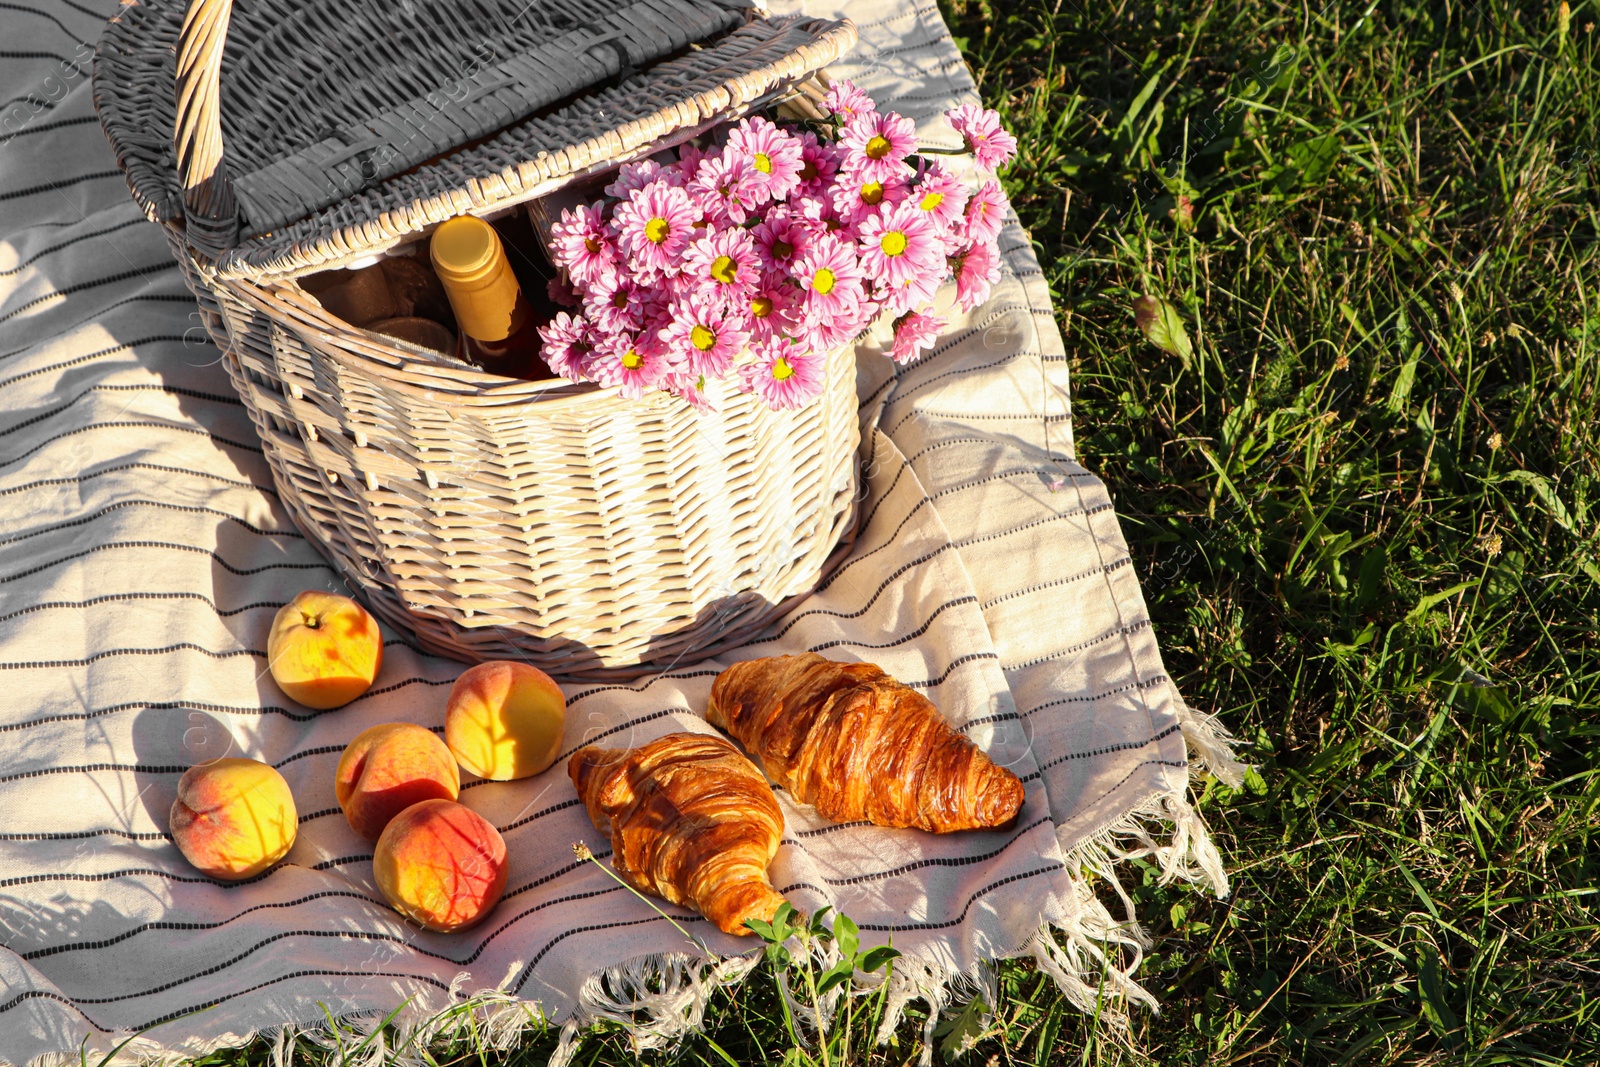 Photo of Picnic basket with flowers, bottle of wine and food on blanket outdoors